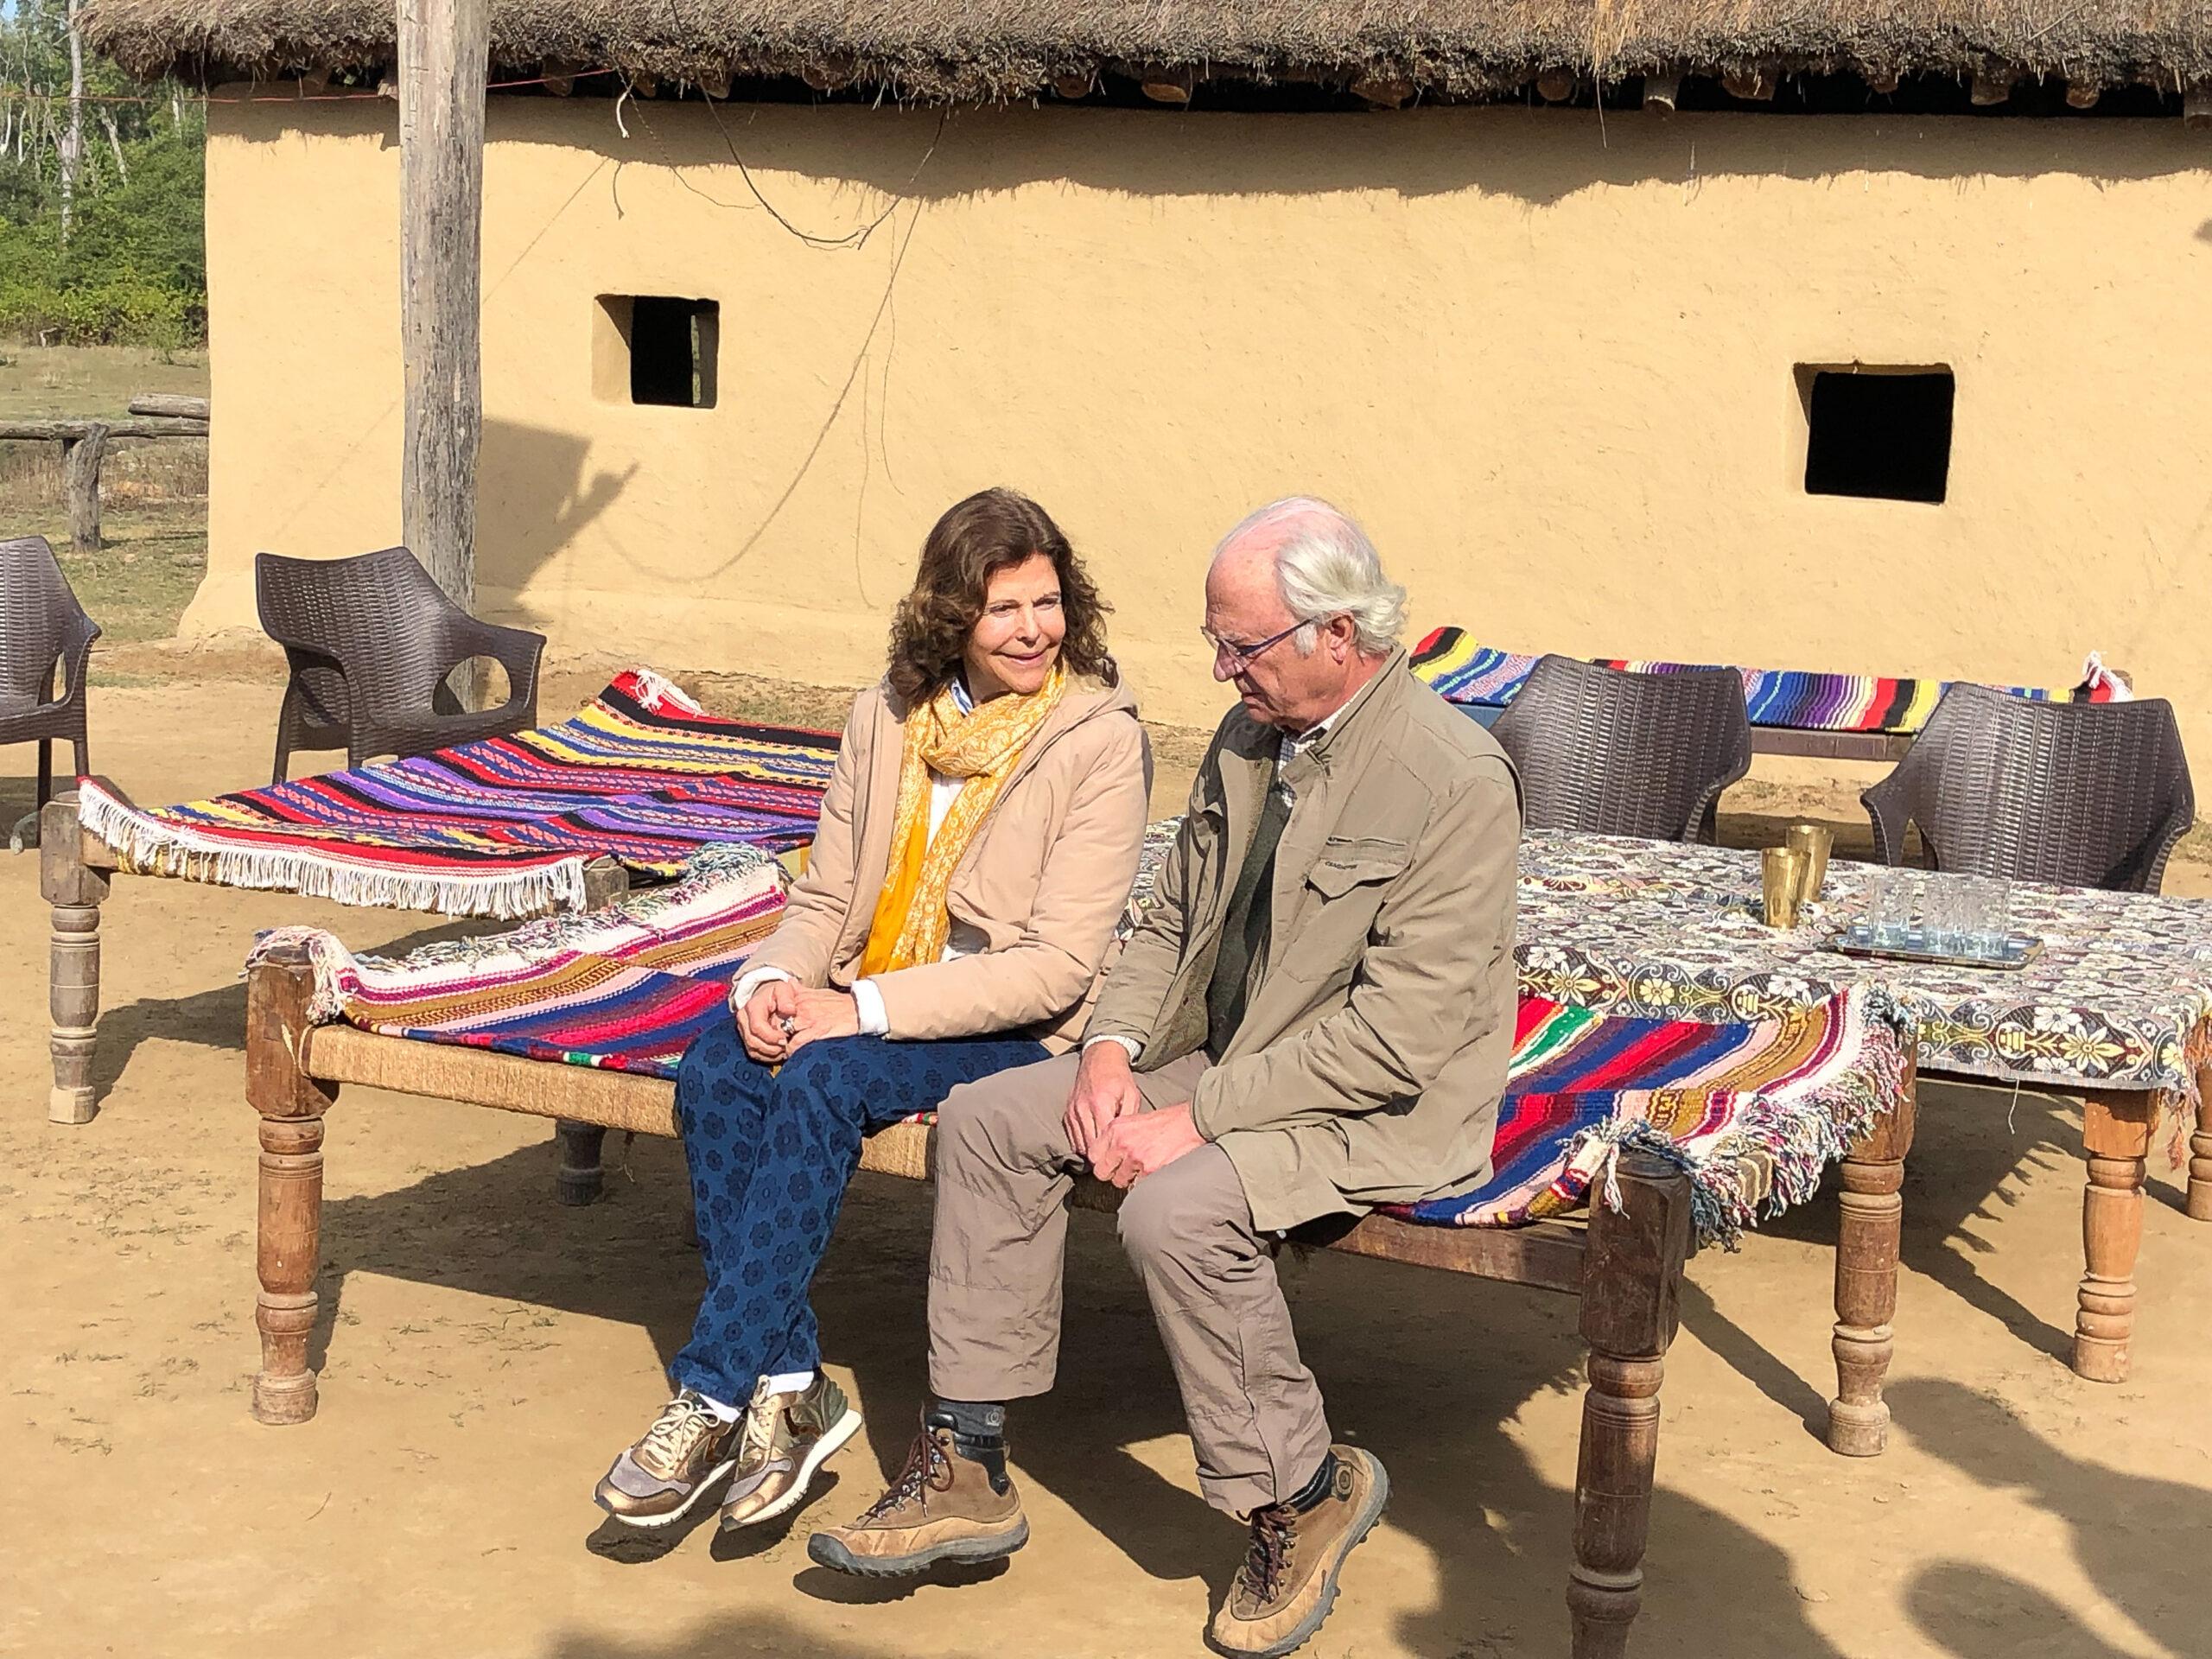 Queen Silvia and King Carl XVI Gustaf sitting on a bench in leisure clothes.